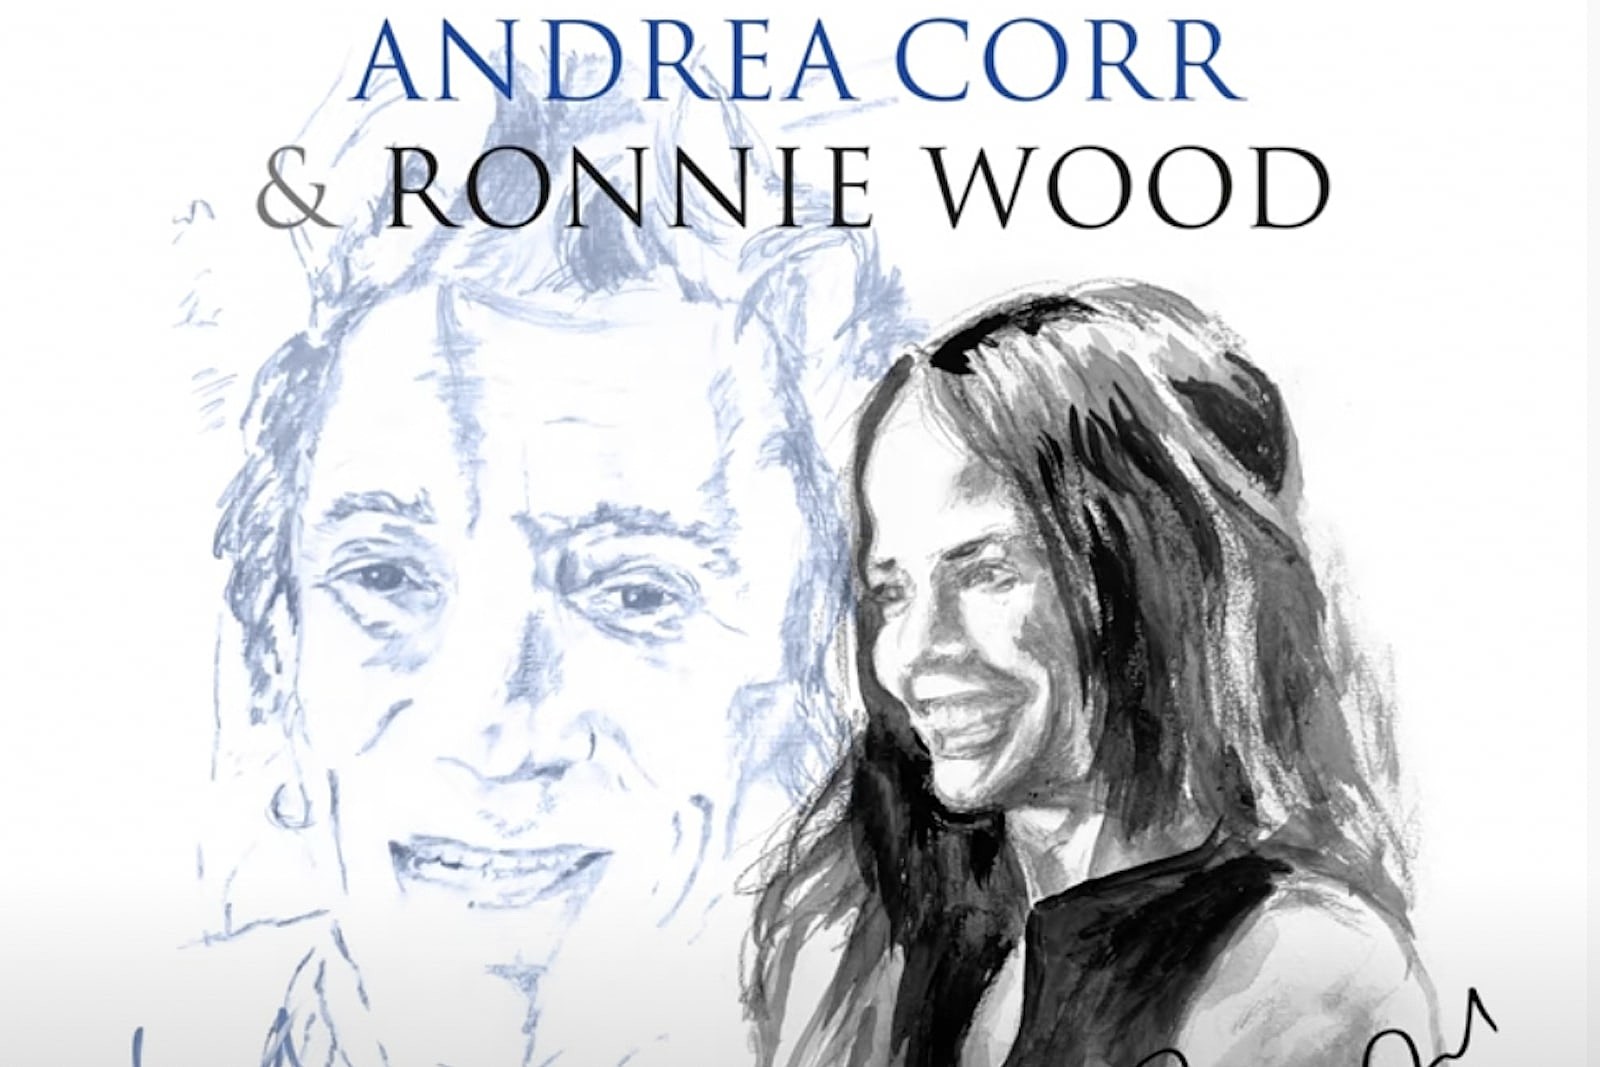 Listen to Ron Wood and Andrea Corr’s Cover of ‘Blue Christmas’